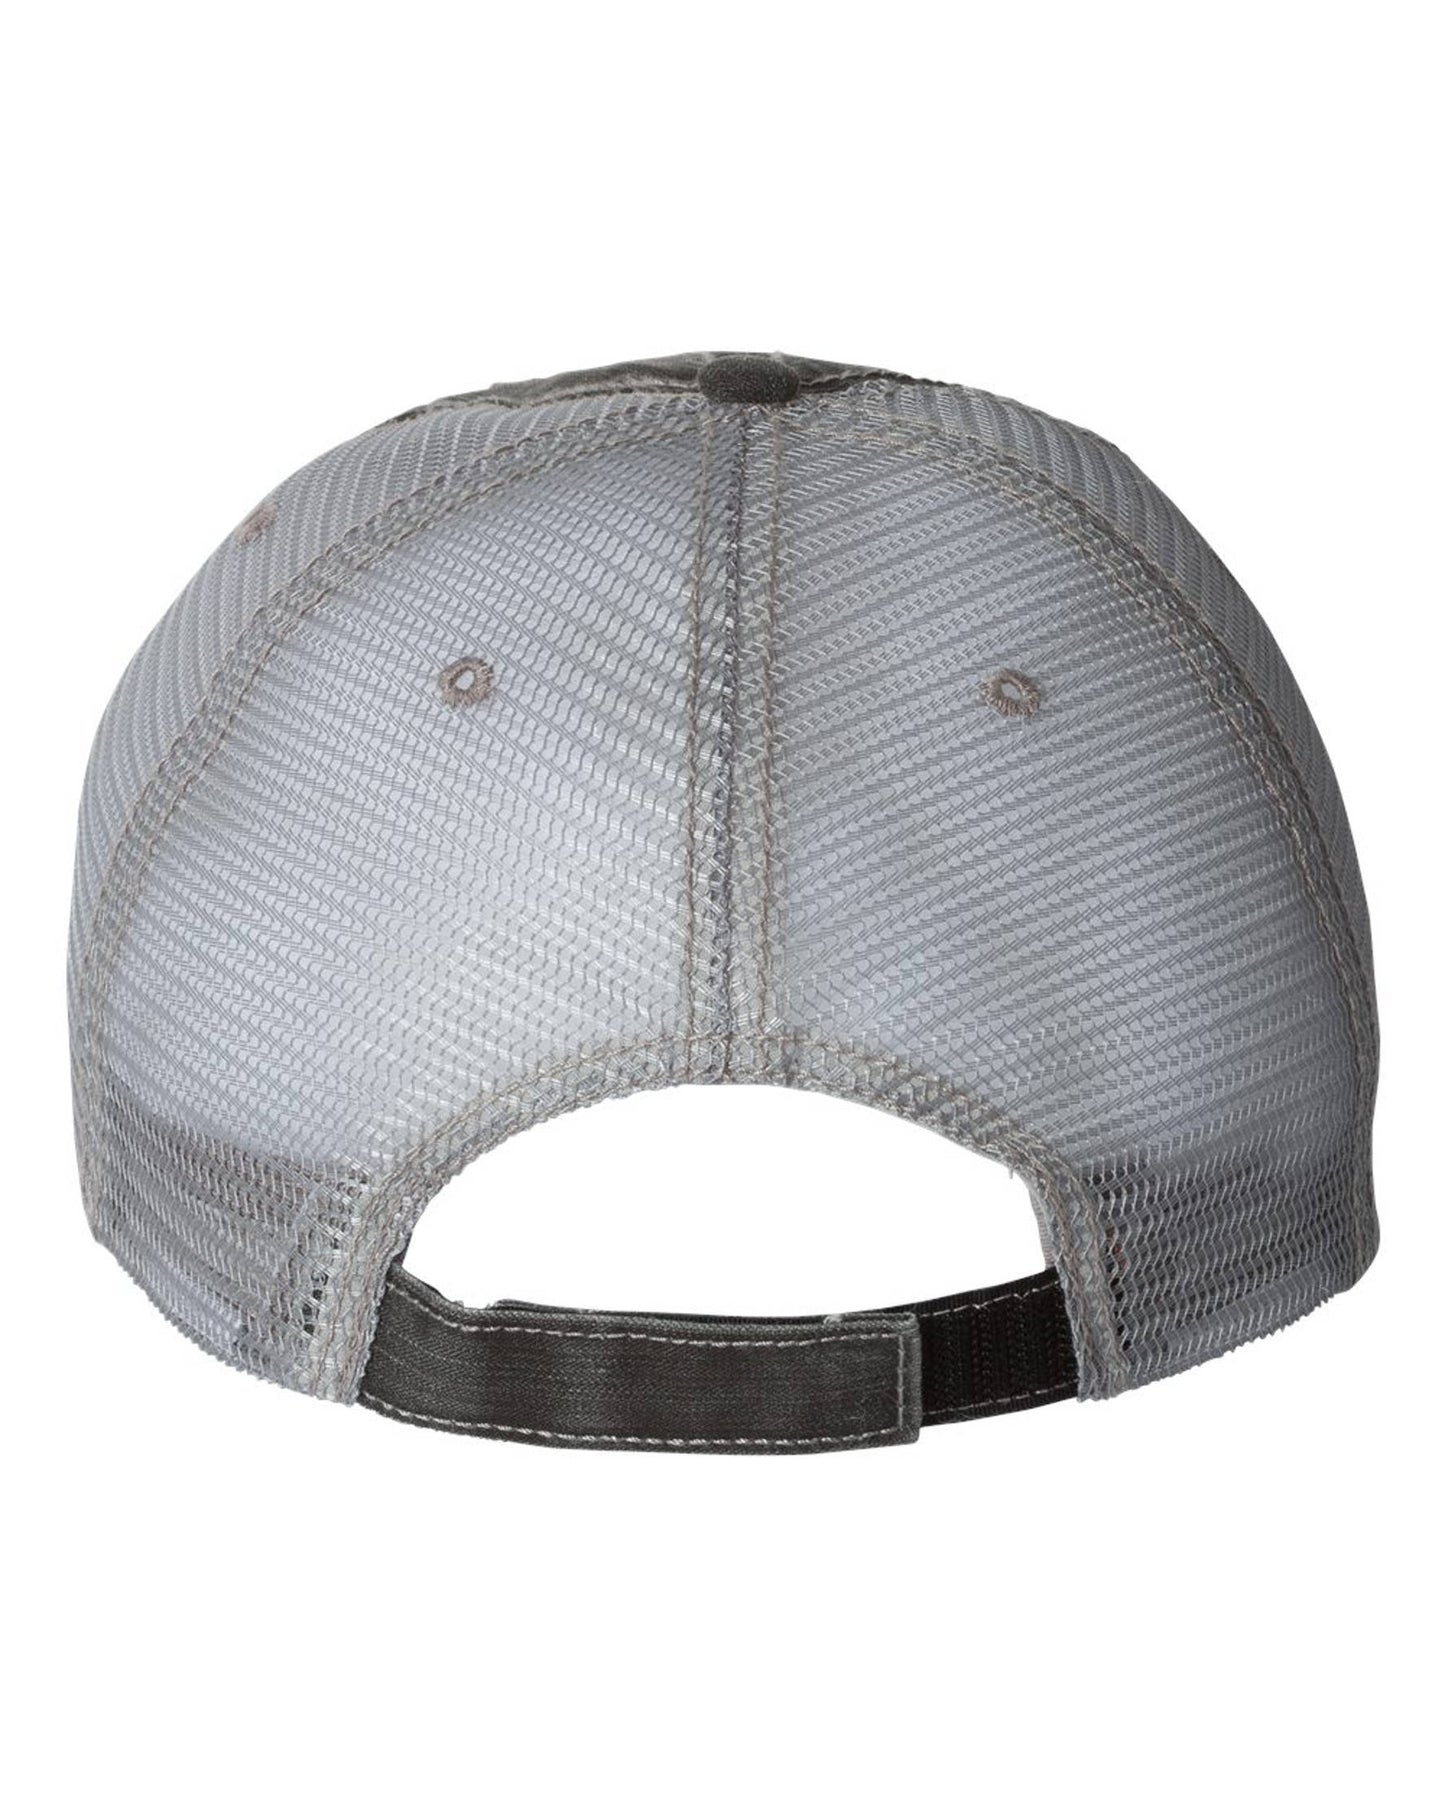 Gray Distressed Trucker Hat - Green Buffalo Check - All US States